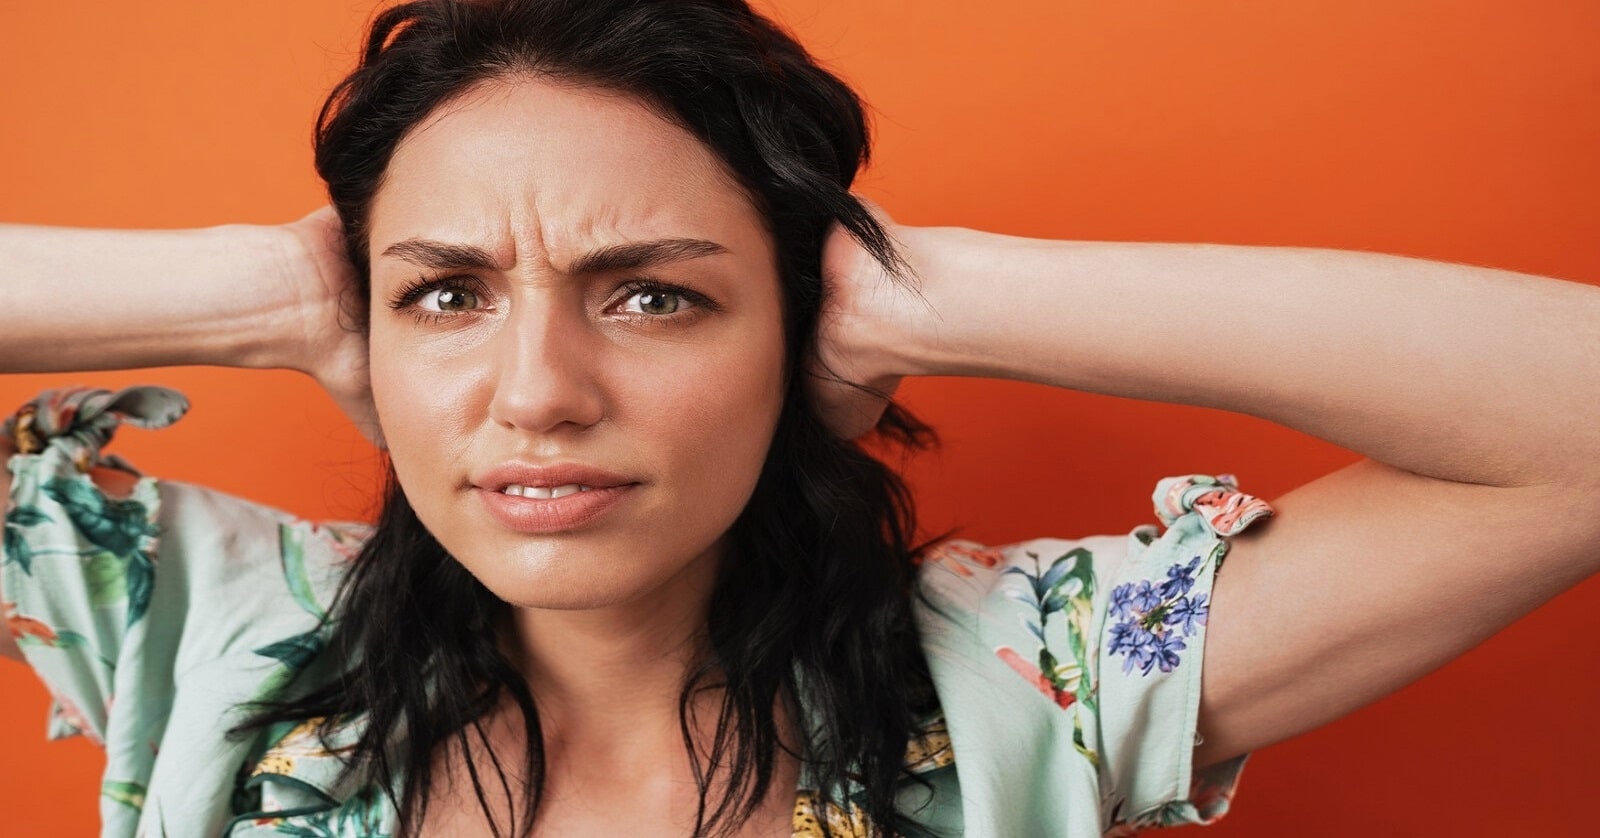 woman with hands over her ears because she's fed up of listening to someone complain